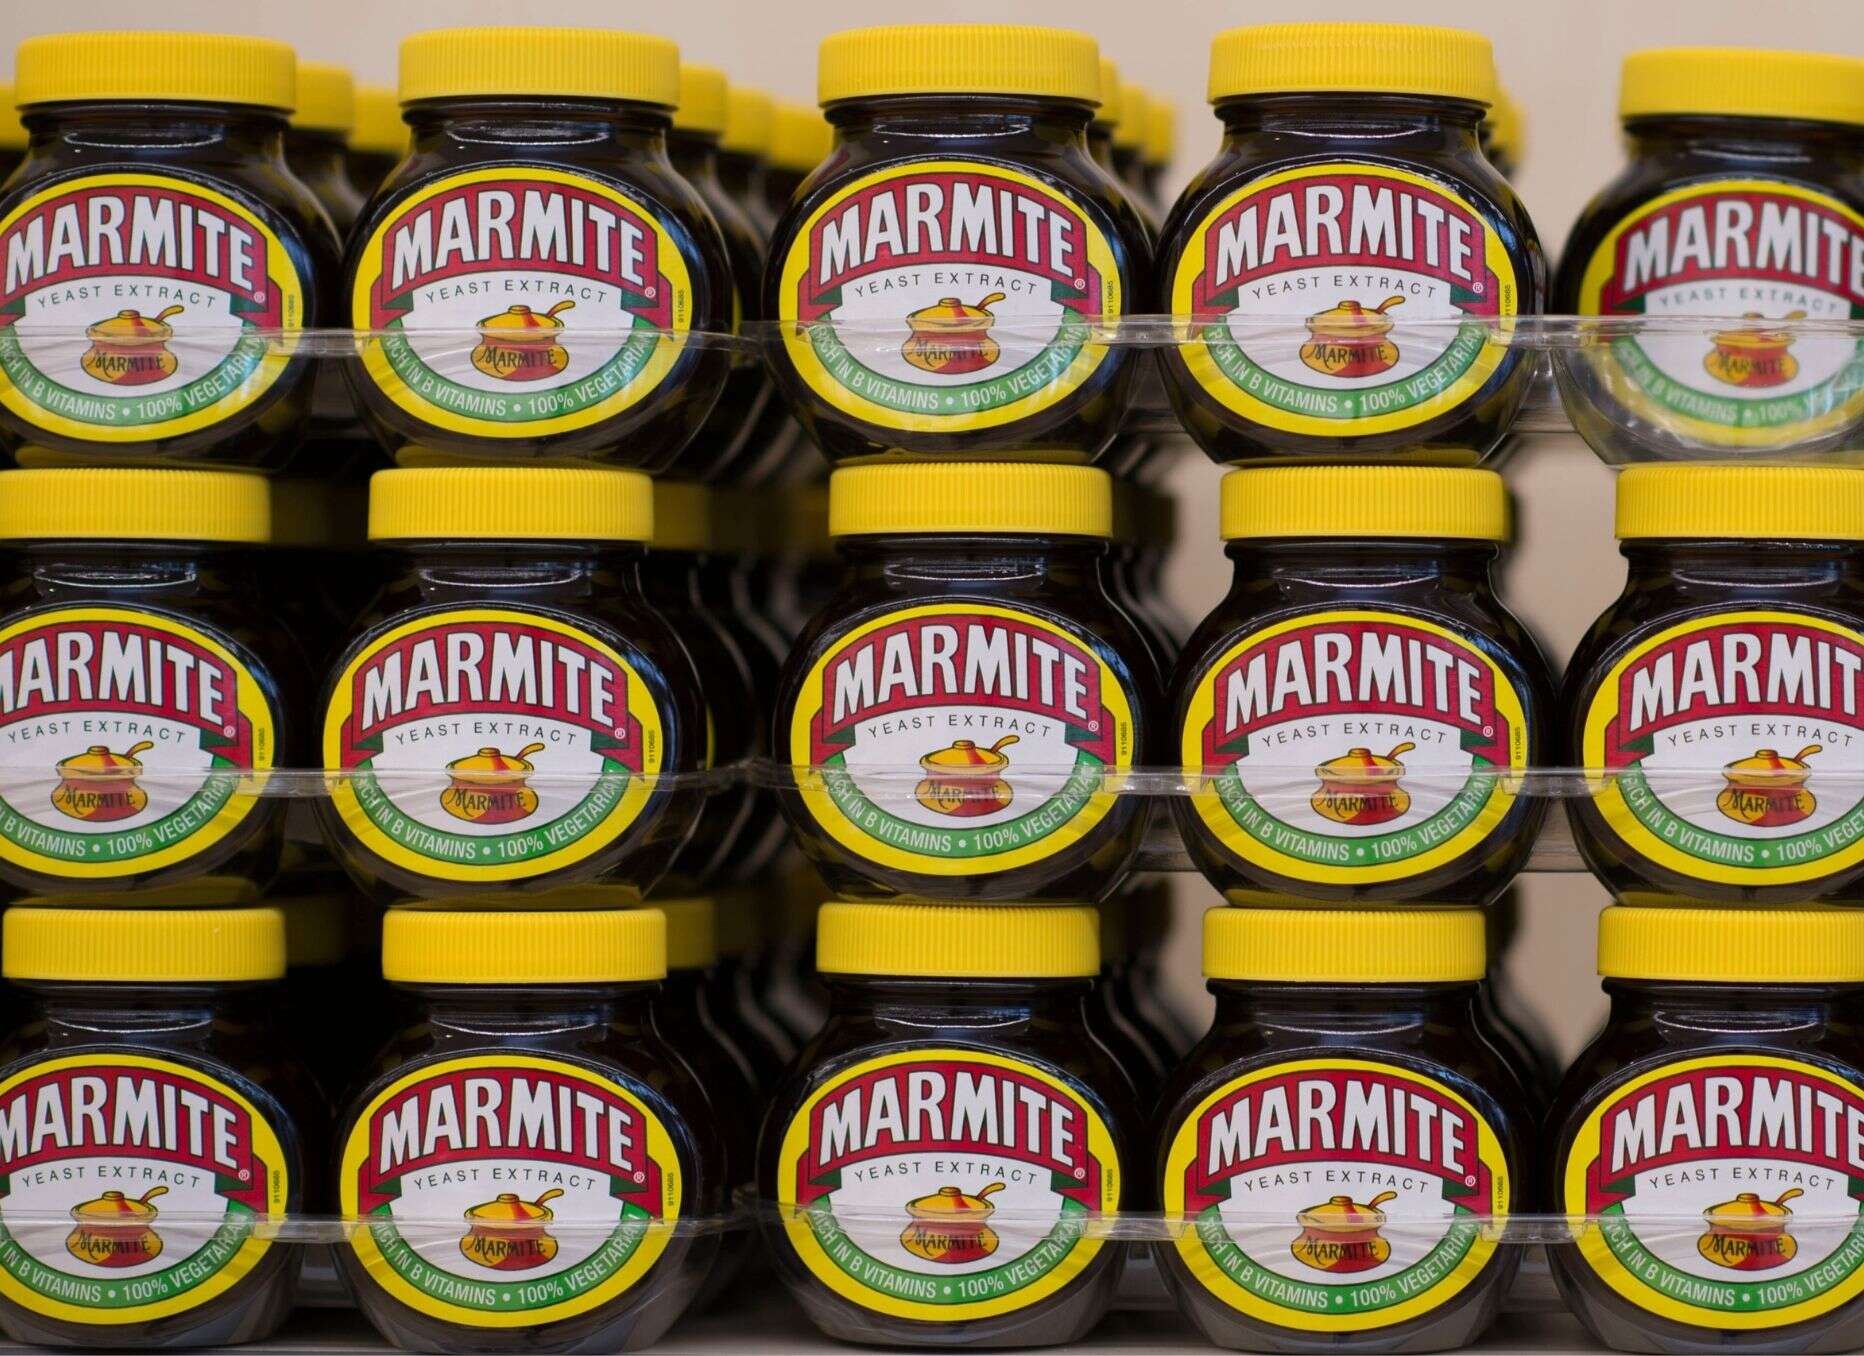 What Does Marmite Actually Taste Like?